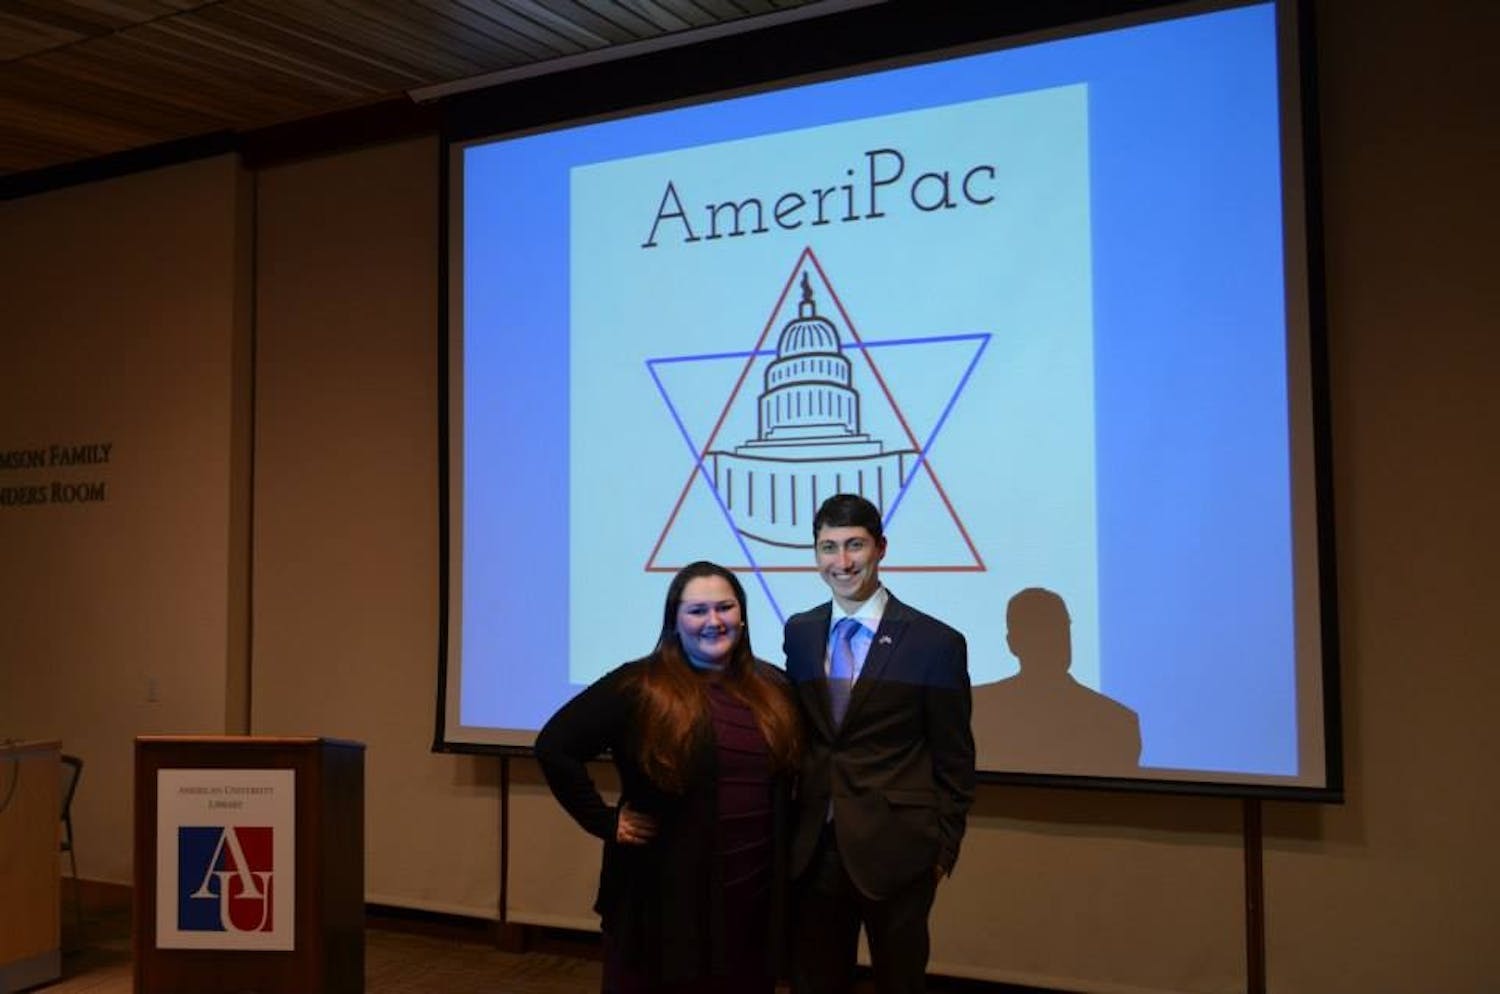 	College Republicans Vice President Zoe Crain (left) and College Democrats President Alex Hoffman (right) pose for a picture after the AmeriPac Leadership Dinner.